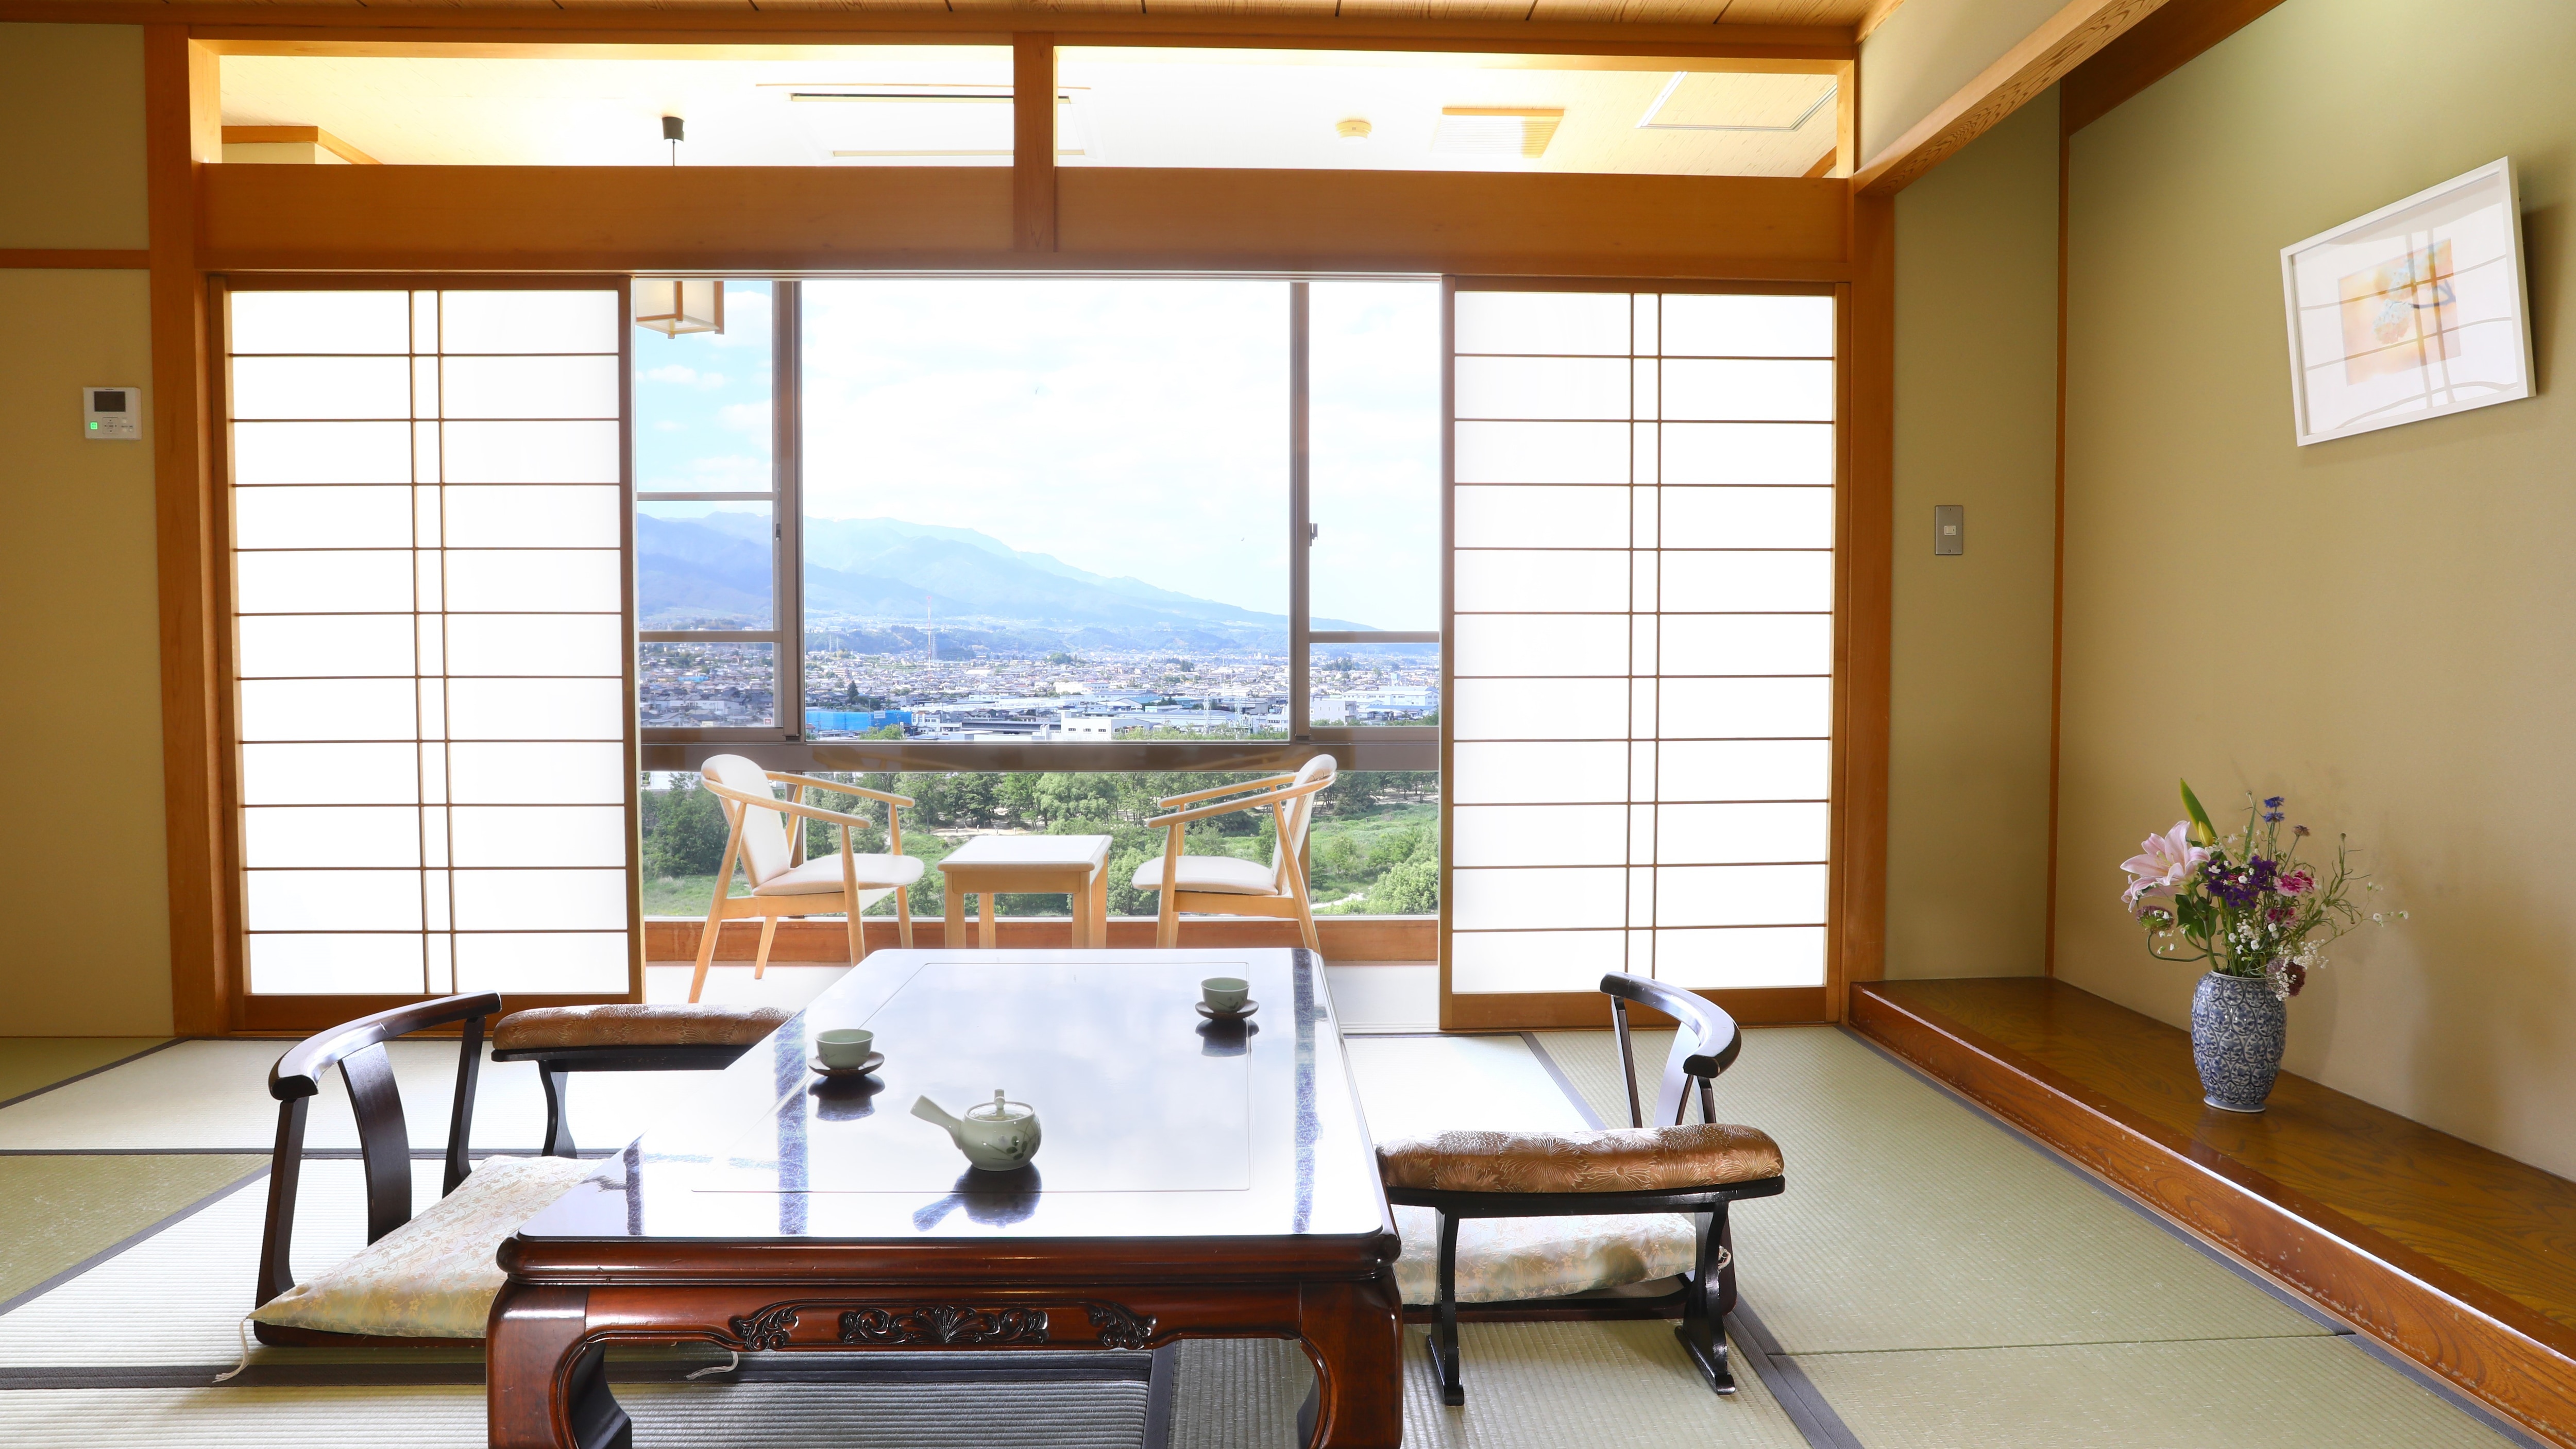 ■ An example of a room with a view of the Tenryu River